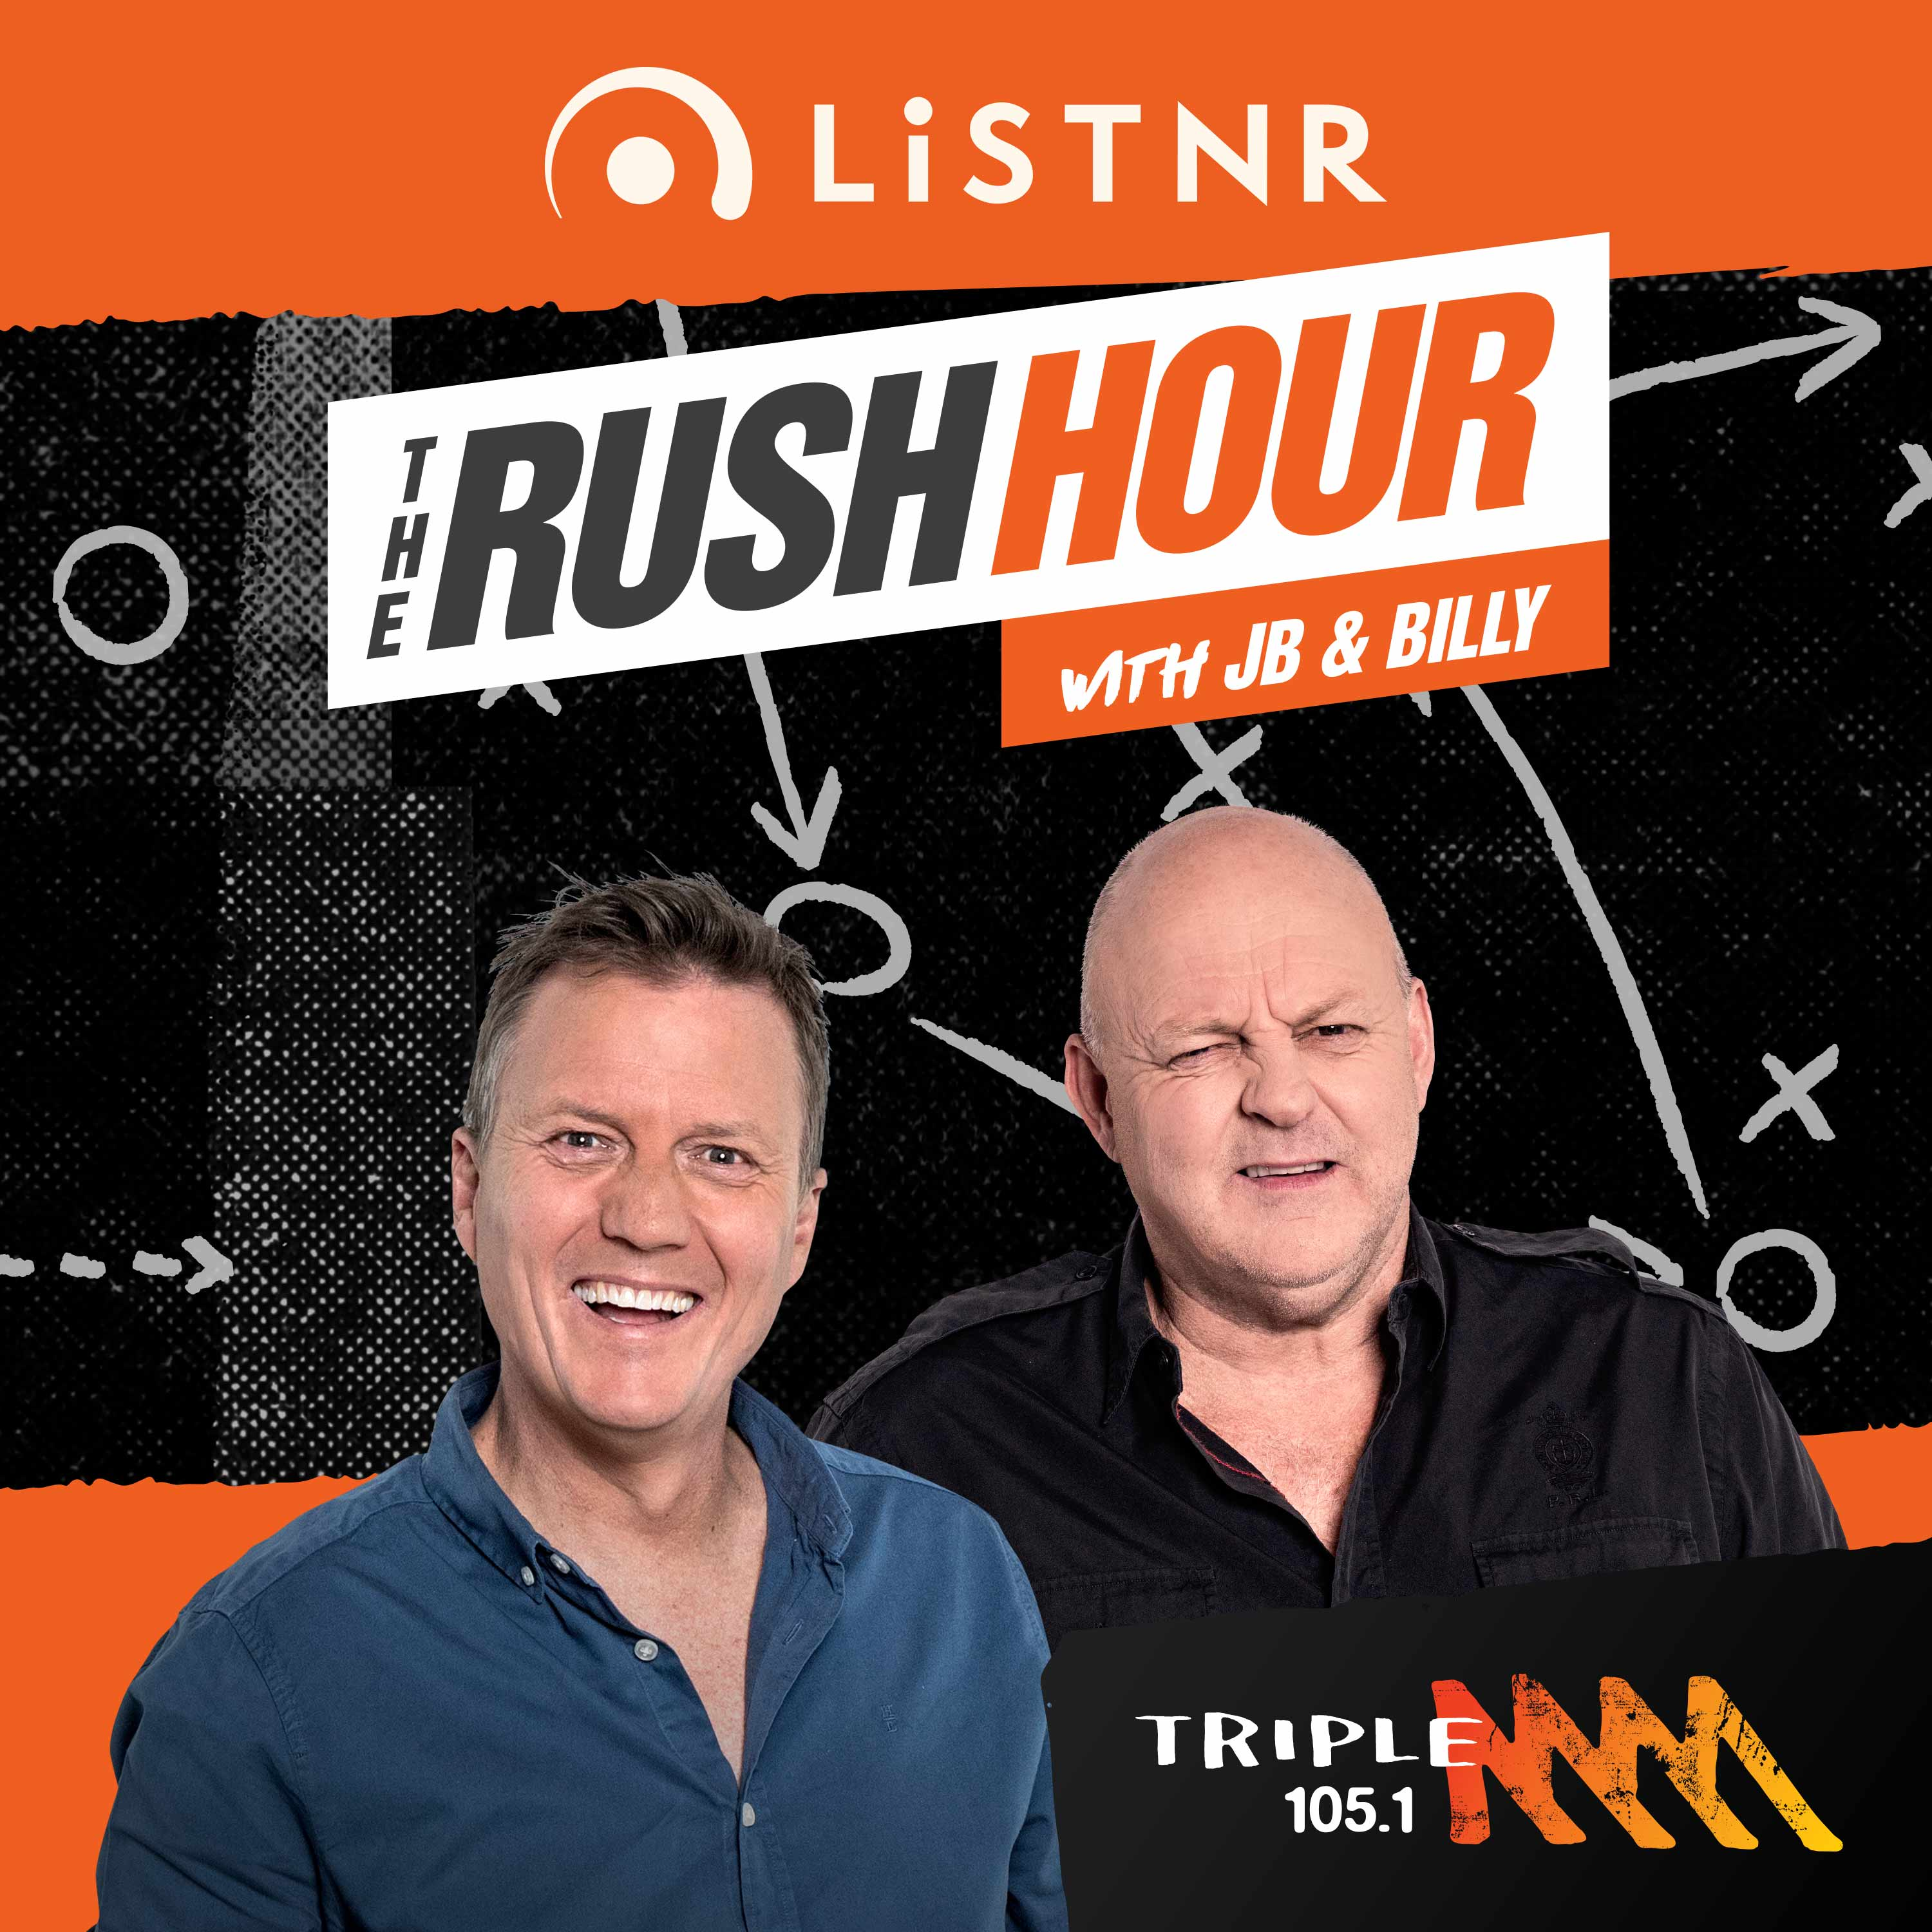 The Midweek Rub with BT and Stevo, Ed Curnow, and Melbourne United's Tai Wesley - The Rush Hour Catch Up podast - Wednesday 28th March 2018